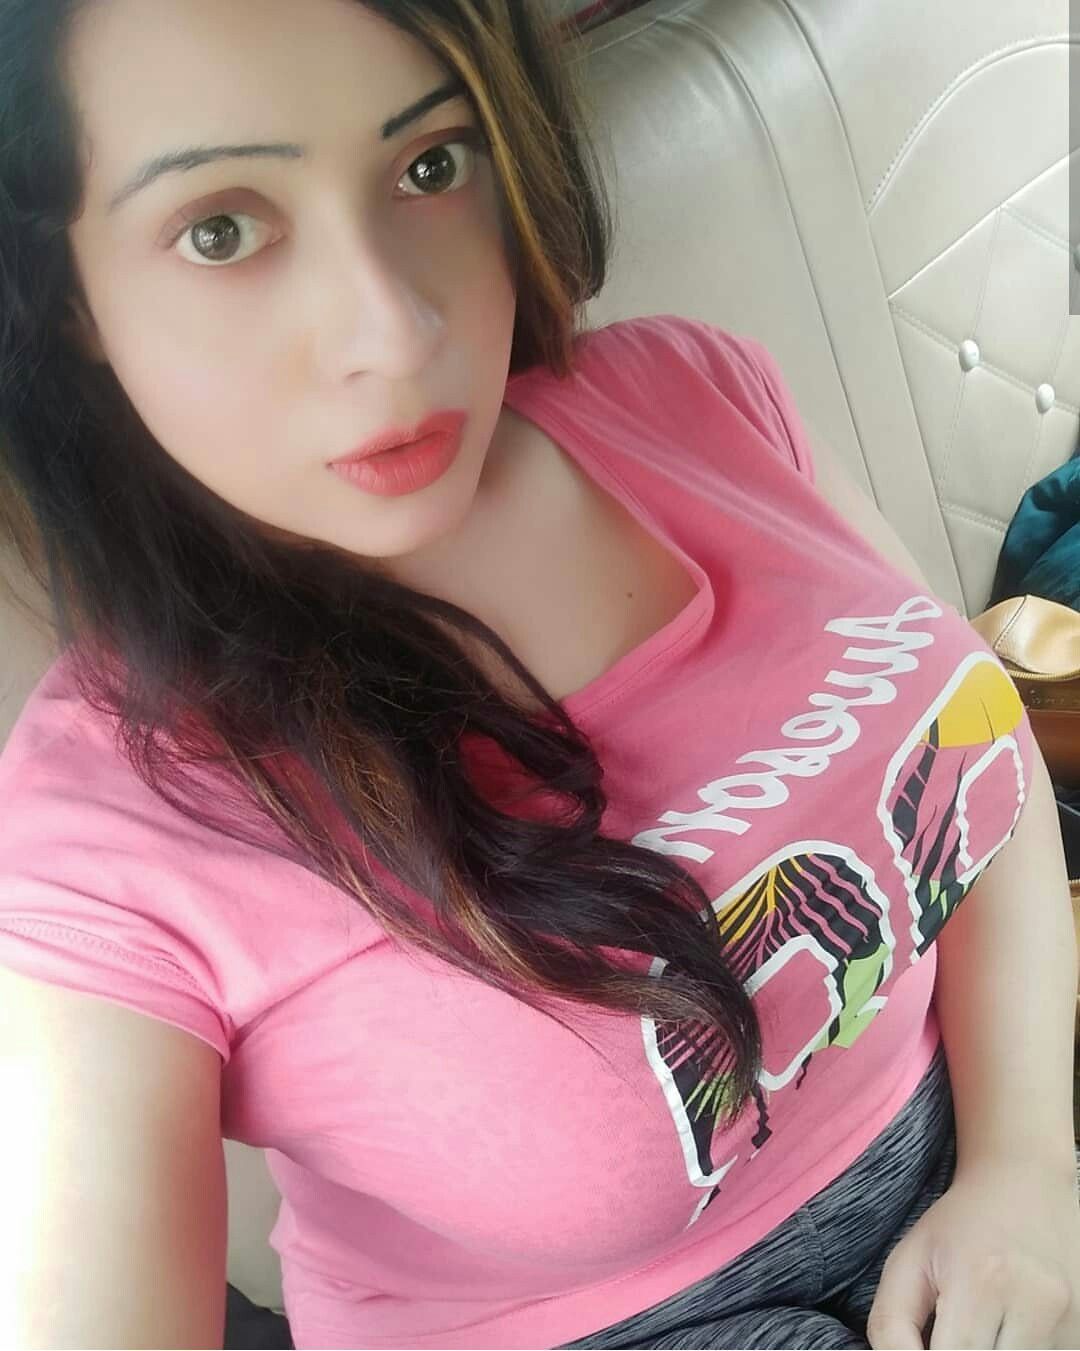 Amritsar █▬█⓿▀█▀ 97716*50293 ✅ 100% genuine young ? college girl and housewife ? Full enjoy open minded girl provide 24hour ?️ home and hotel full